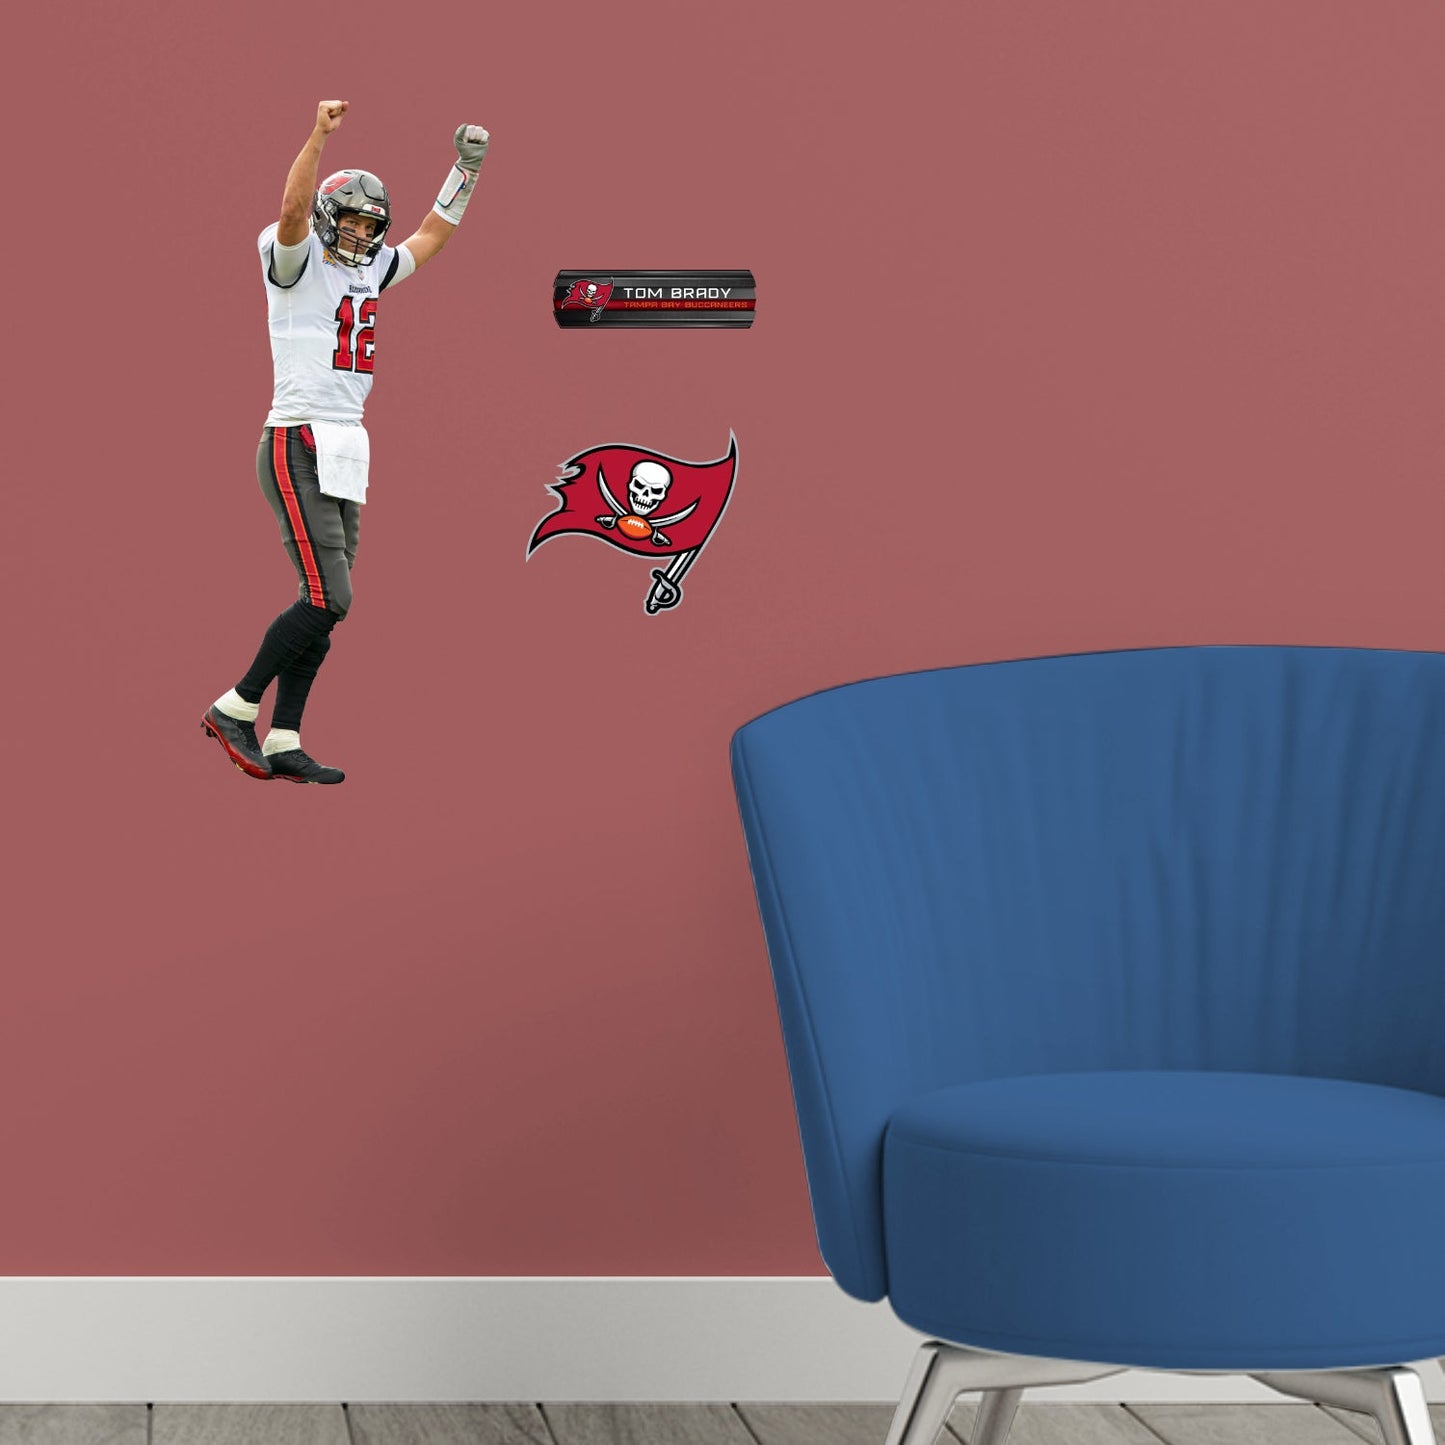 Tampa Bay Buccaneers: Tom Brady Winner - Officially Licensed NFL Removable Adhesive Decal